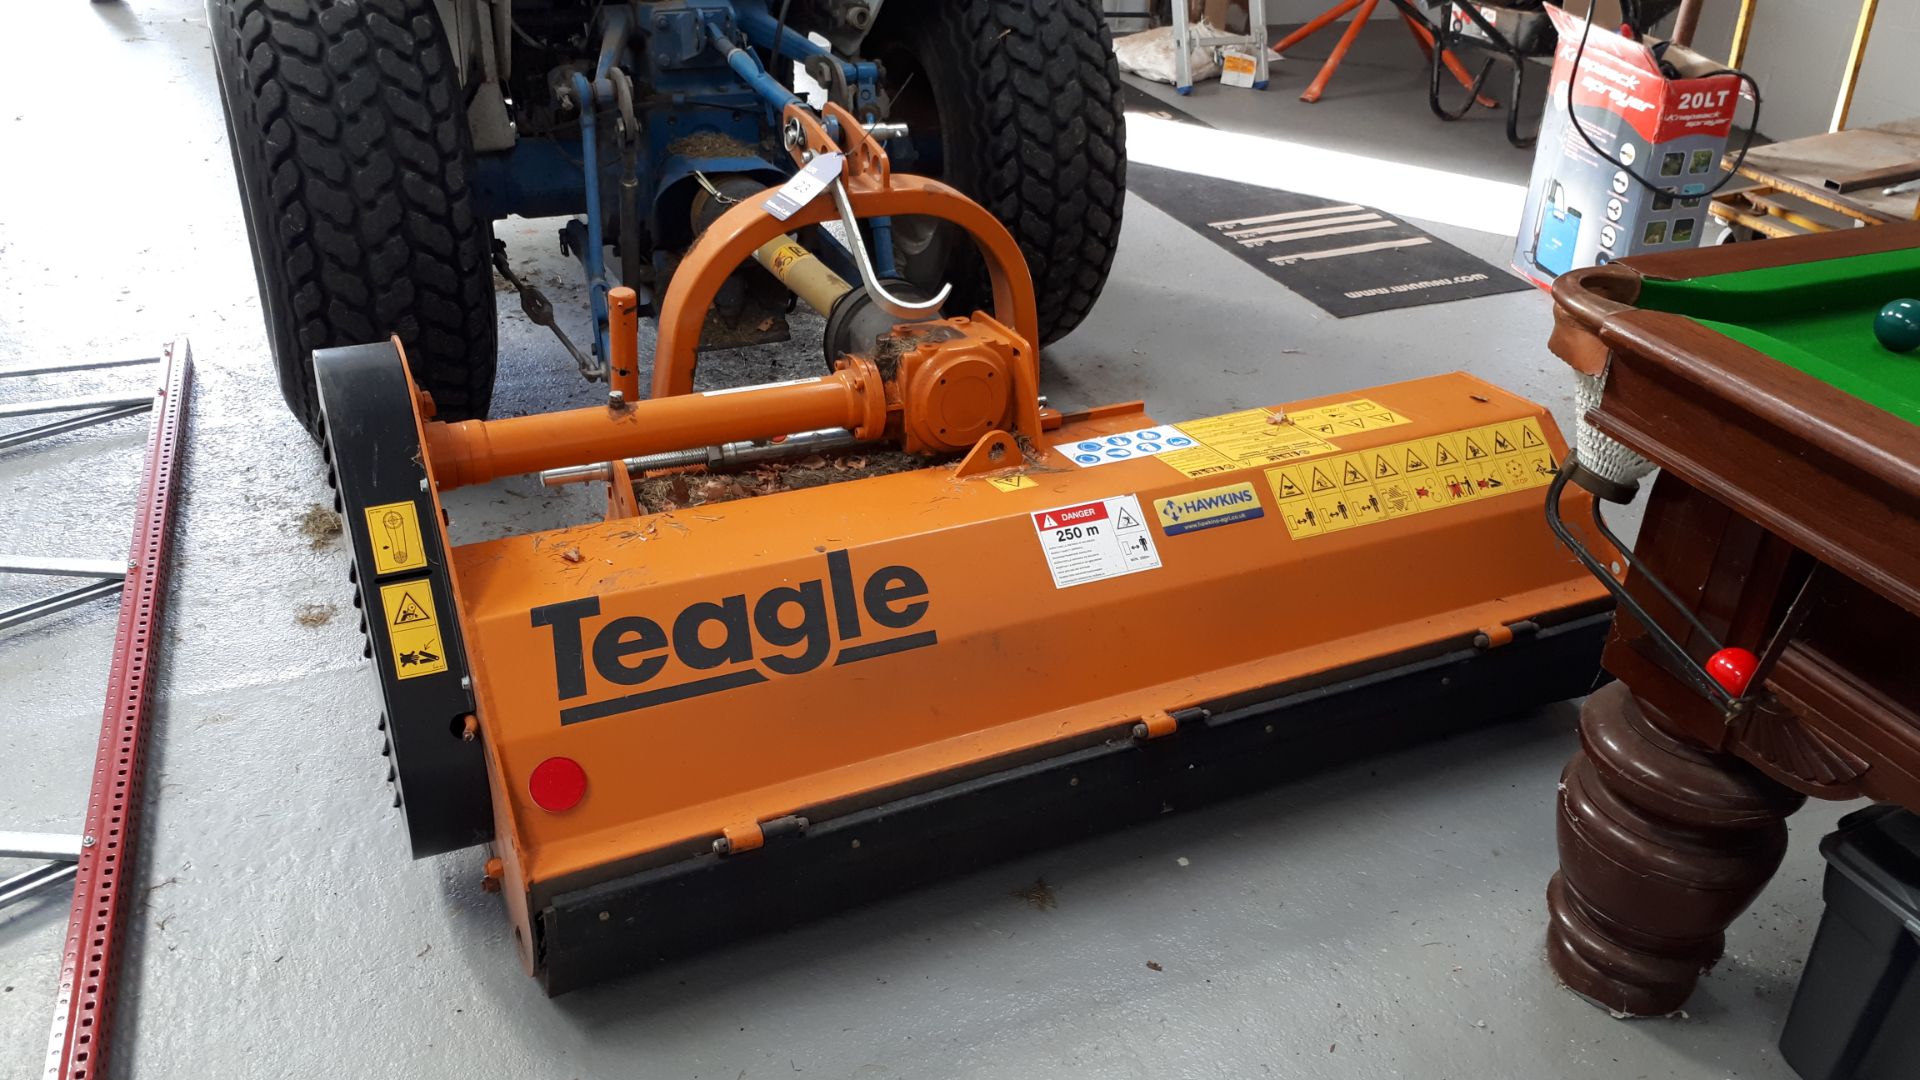 Teagle Park/P160 flail mower, Serial number 645081